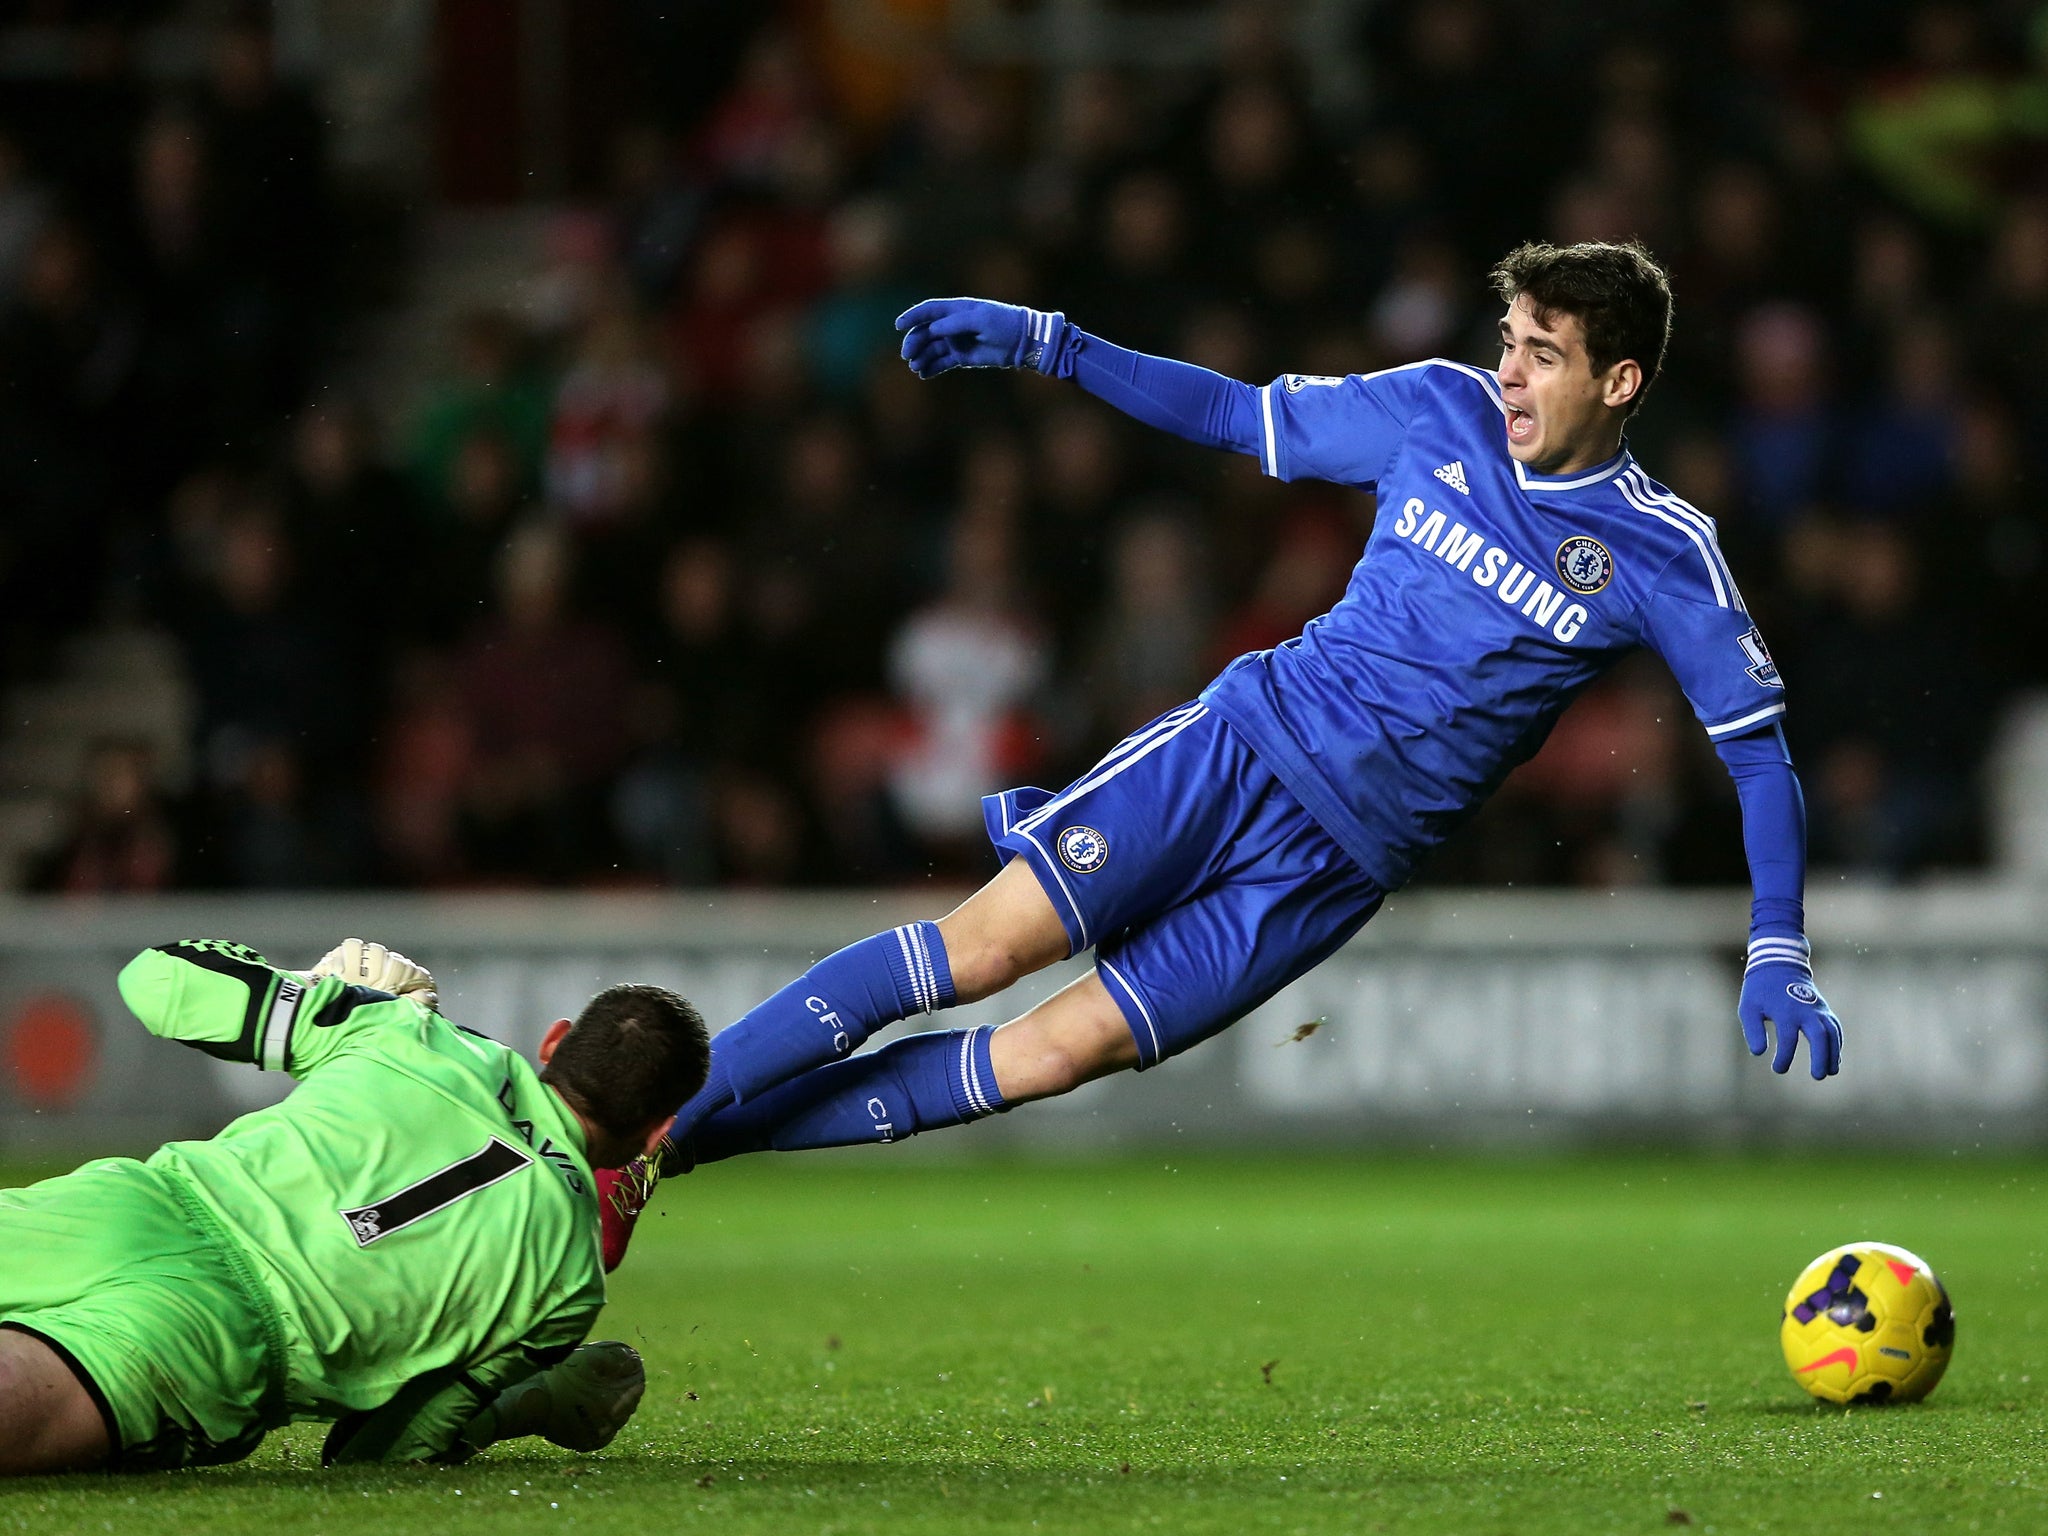 Chelsea midfielder Oscar was booked for this dive